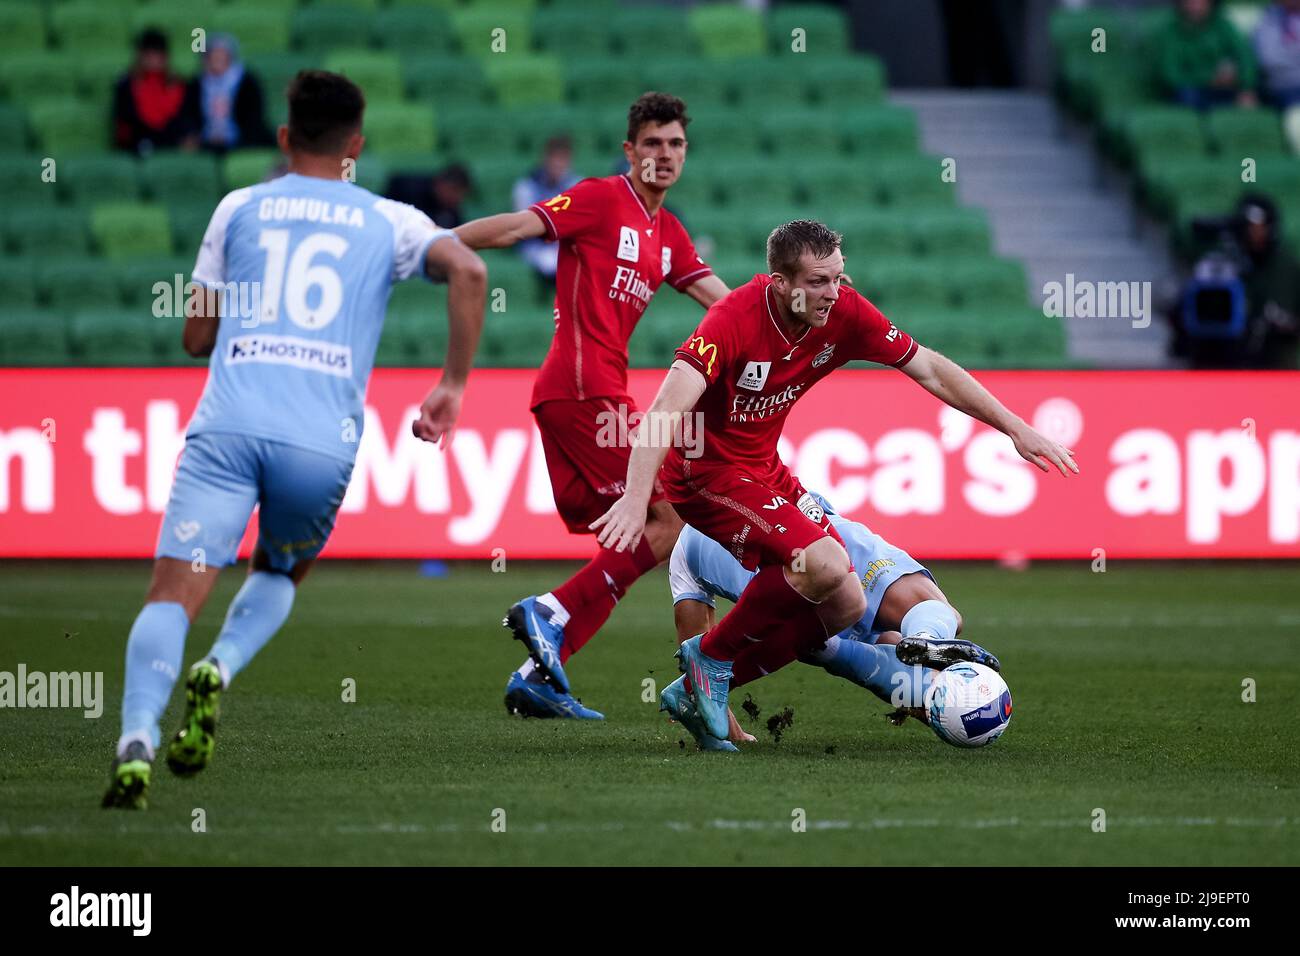 Melbourne, Australia, 22 May, 2022. Ryan Kitto of Adelaide United controls the ball during the A-League Semi Final soccer match between Melbourne City FC and Adelaide United at AAMI Park on May 22, 2022 in Melbourne, Australia. Credit: Dave Hewison/Speed Media/Alamy Live News Stock Photo